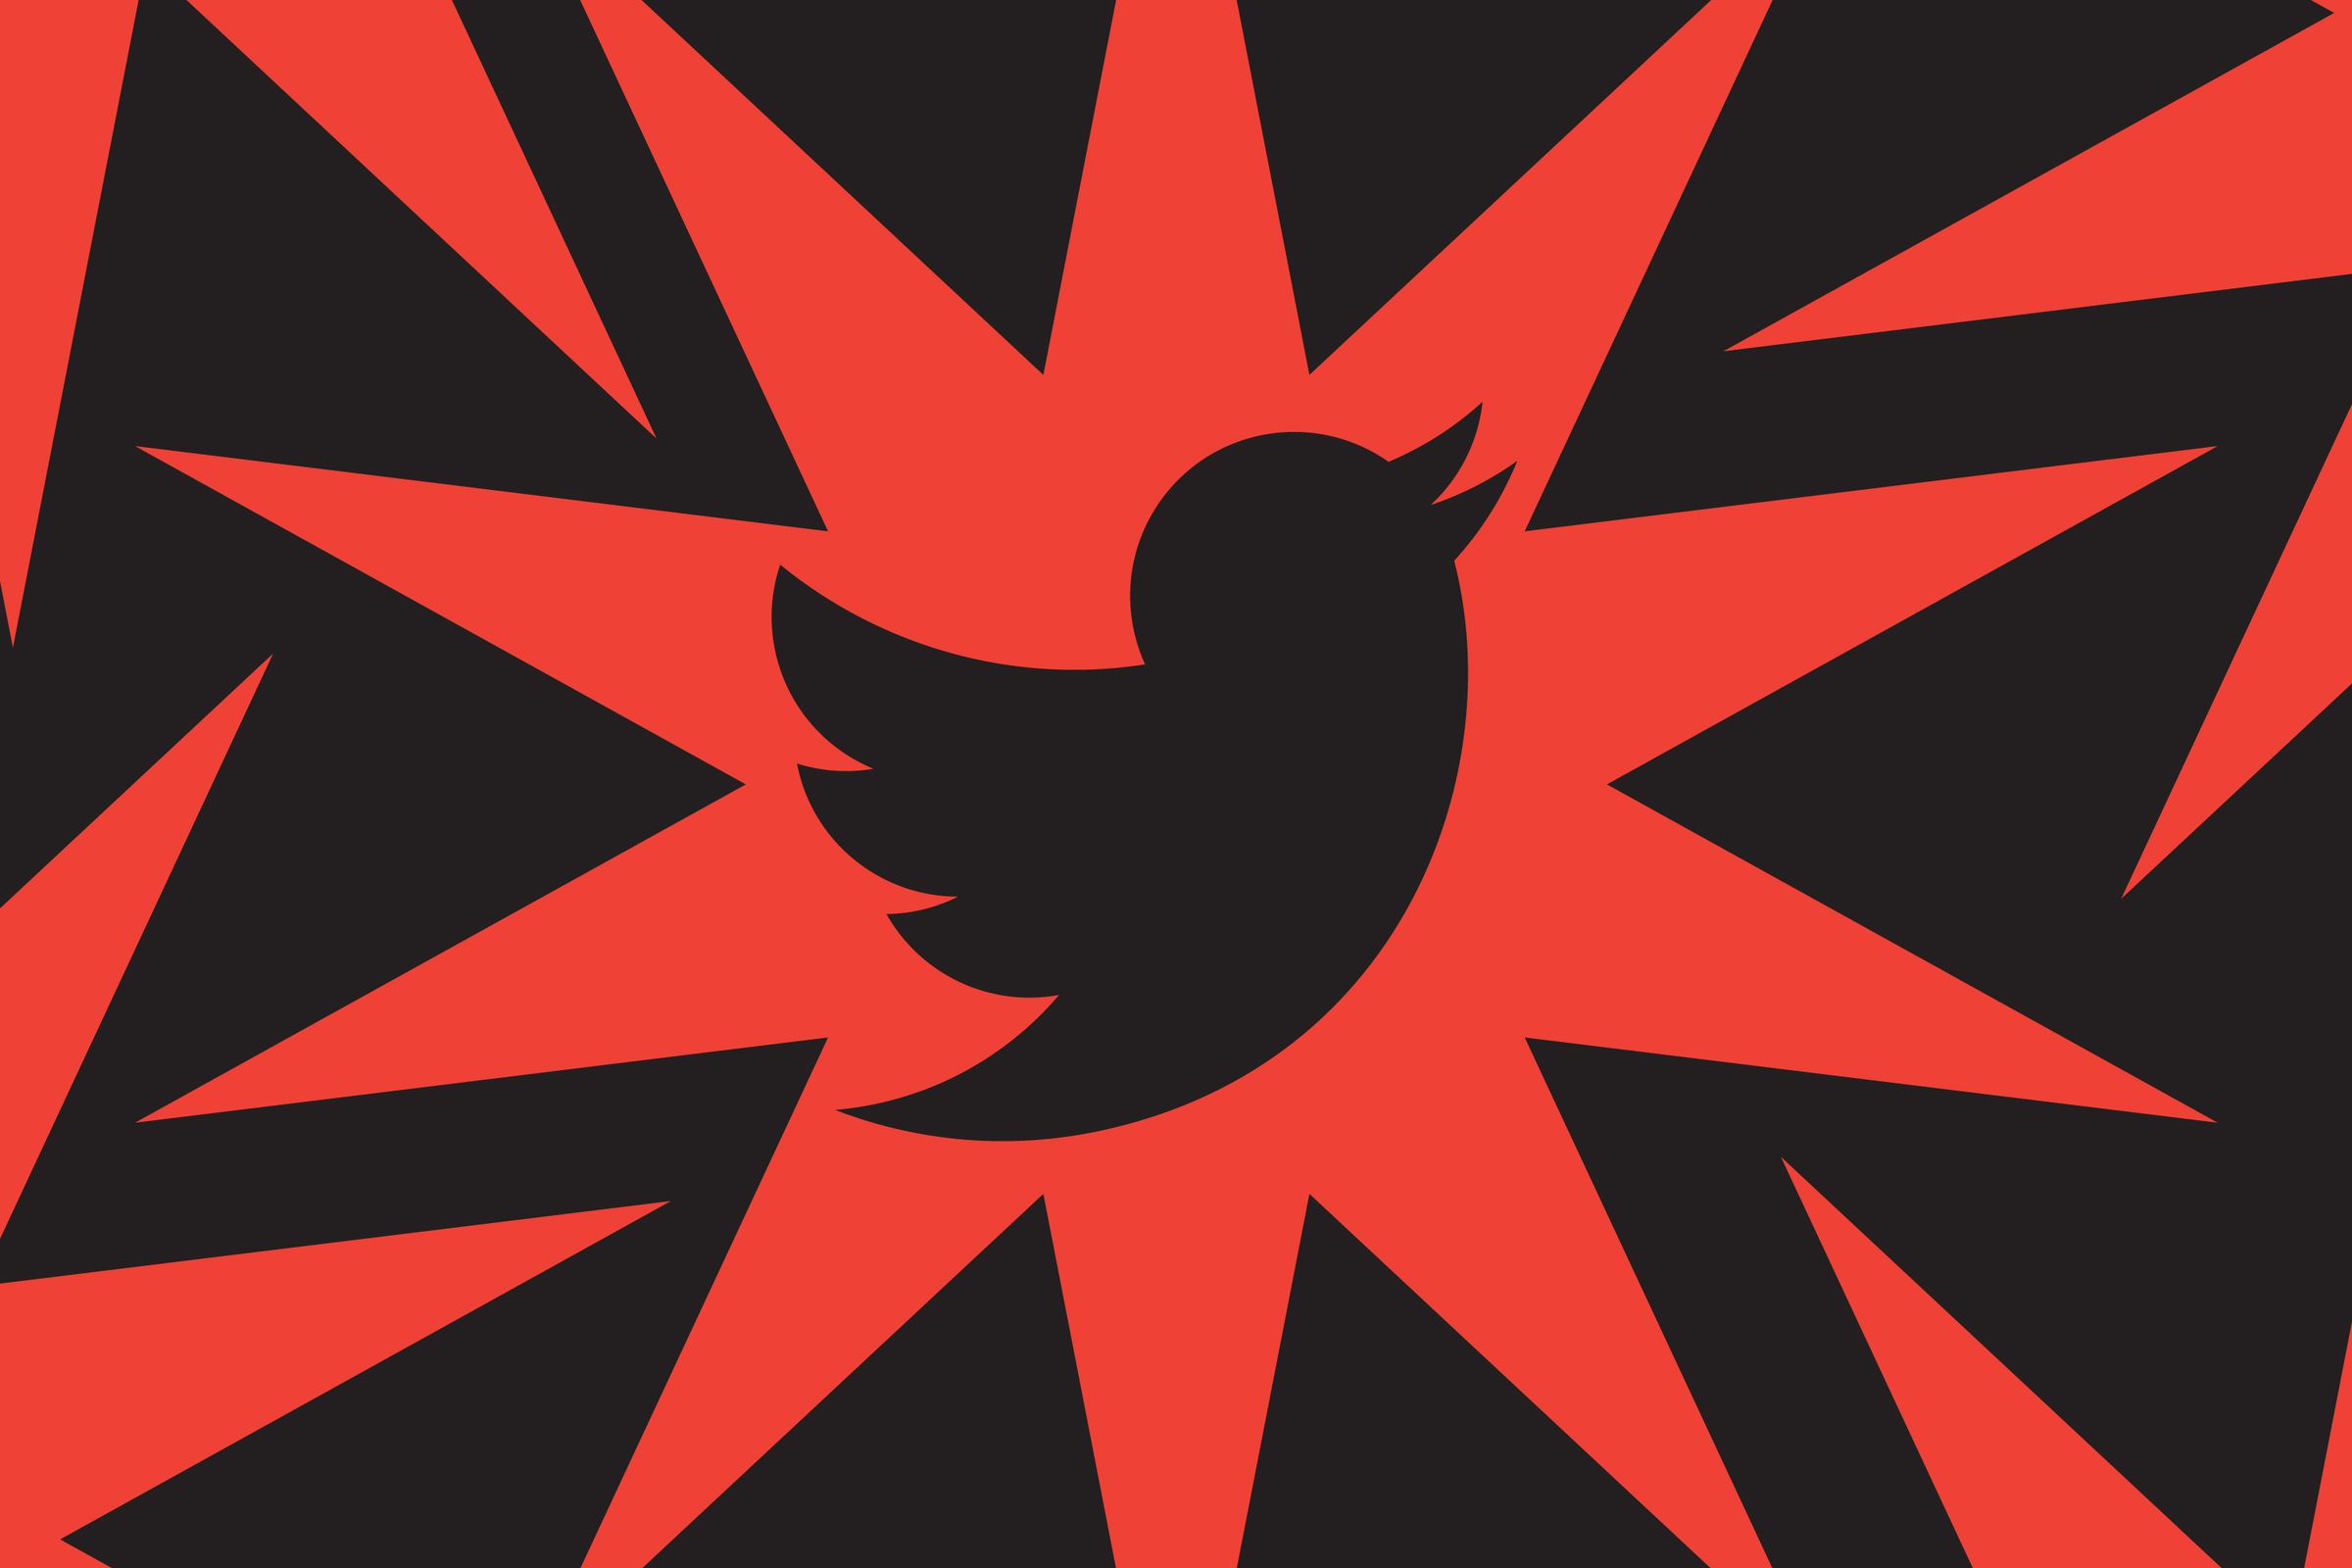 Twitter’s logo on a red and black background